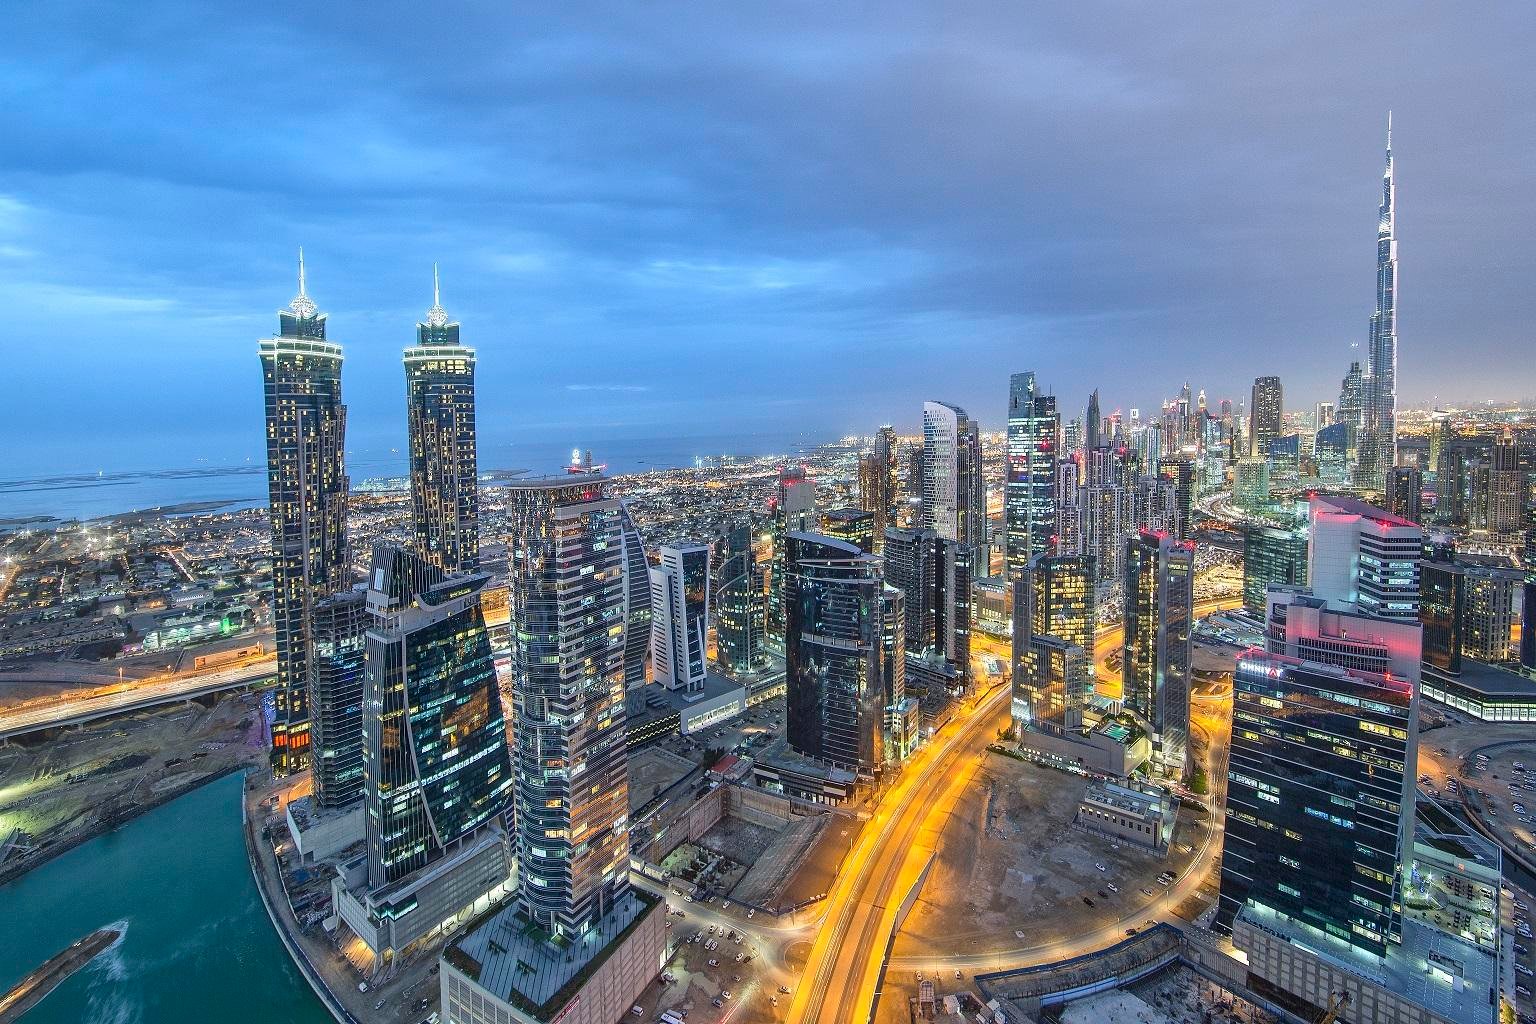 Dubai witnesses 2,012 real estate transactions worth $1.44 billion in the first week of Ramadan